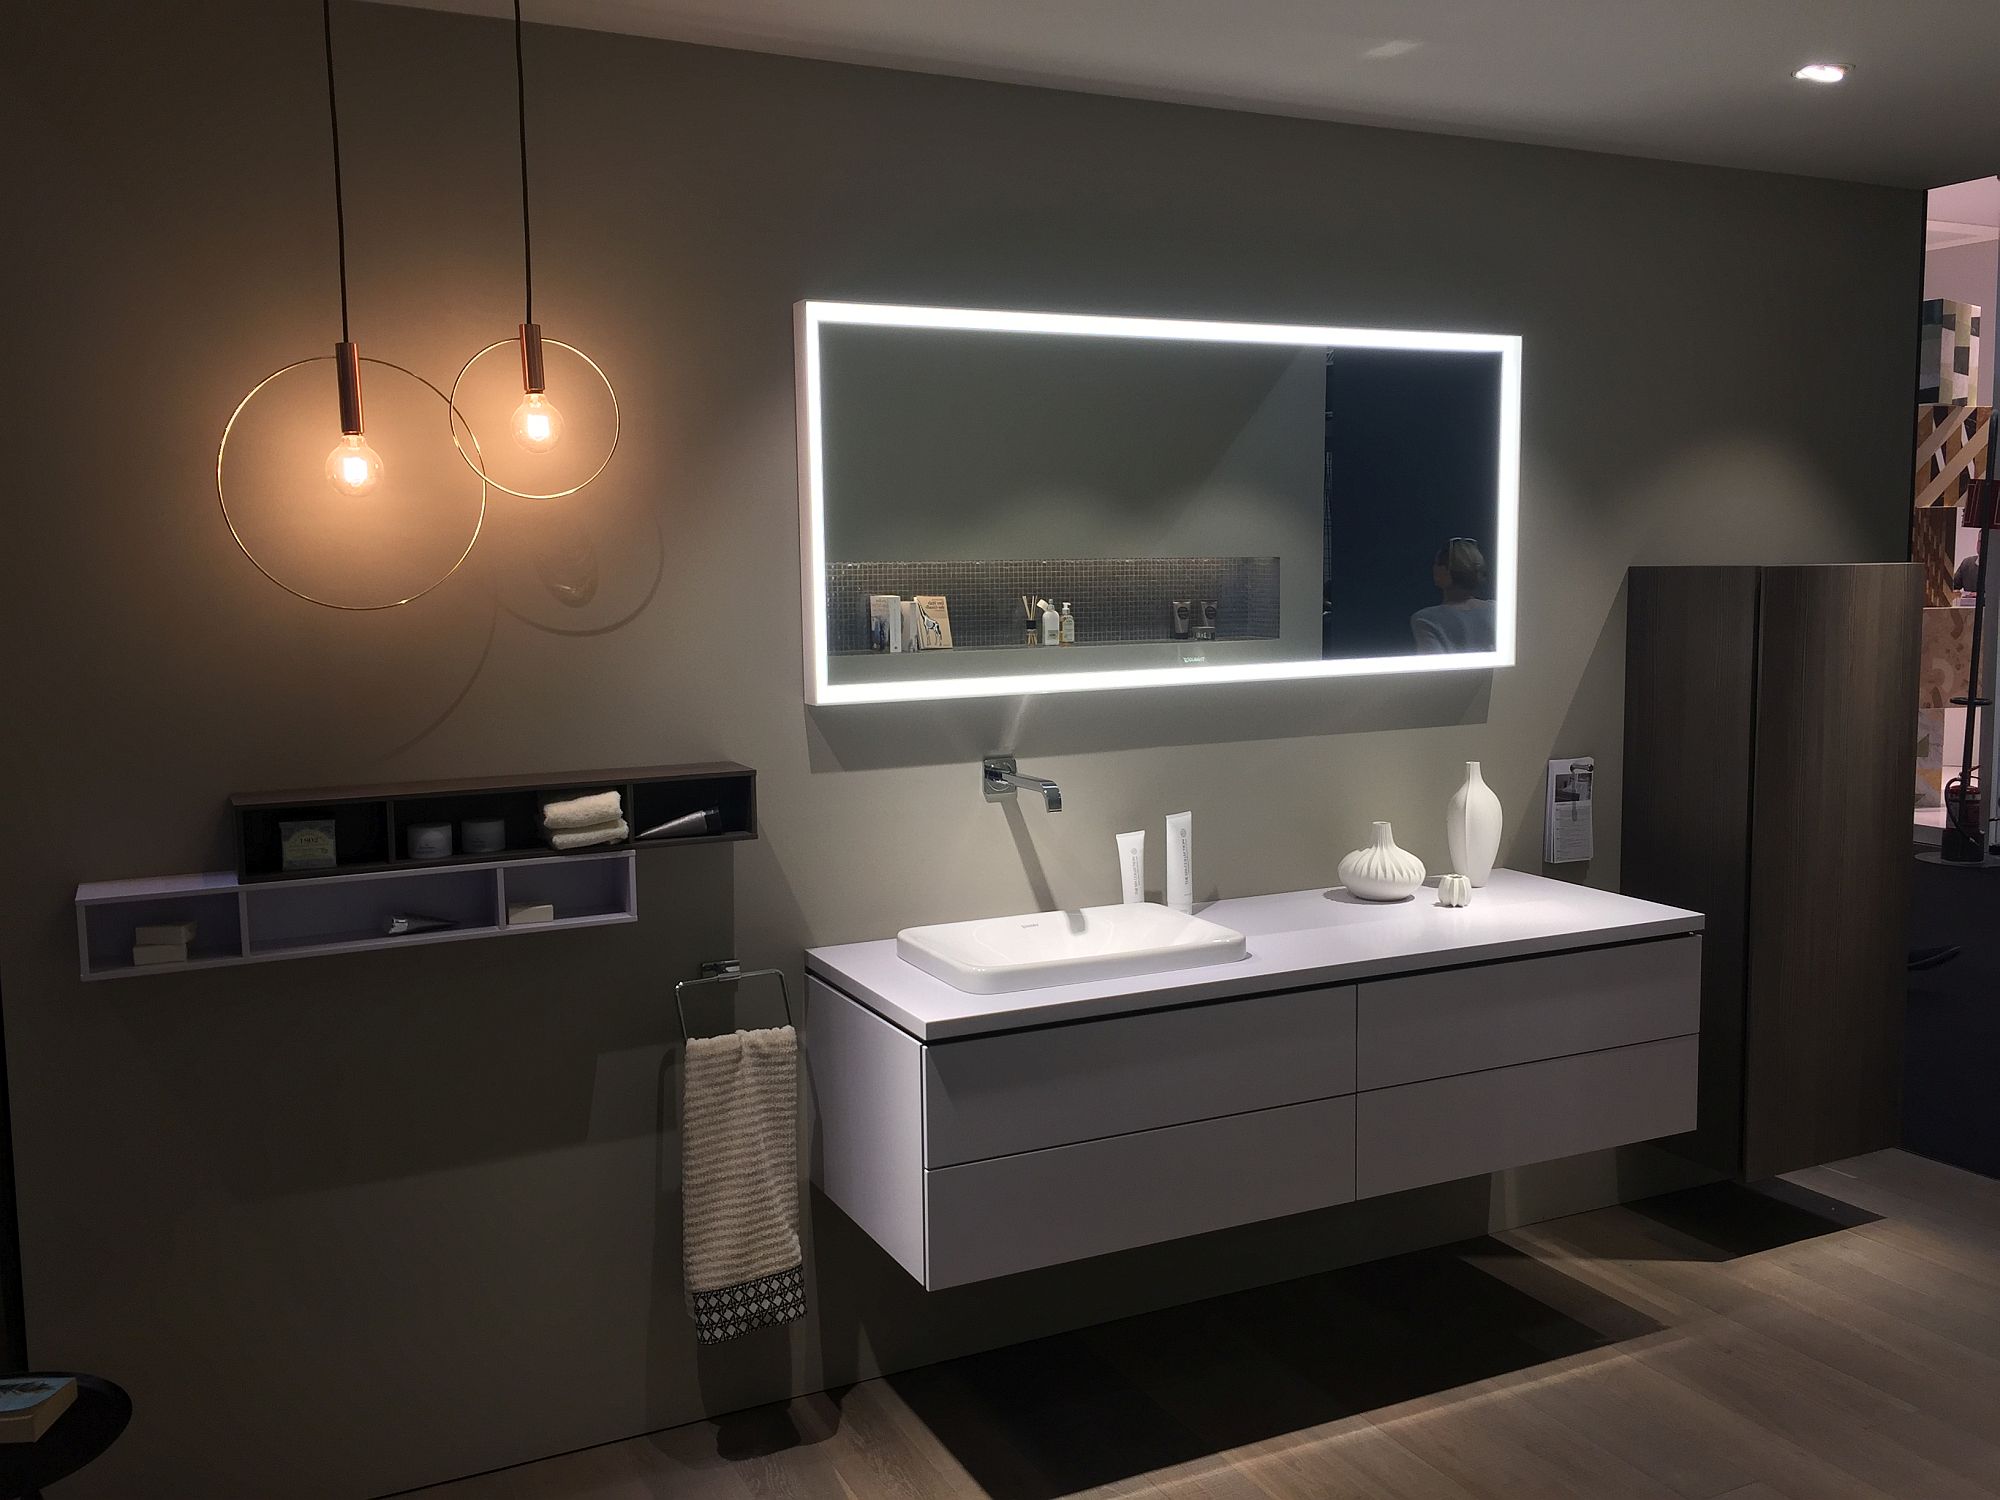 LED strip lighting transforms the amnbiance of the bathroom completely